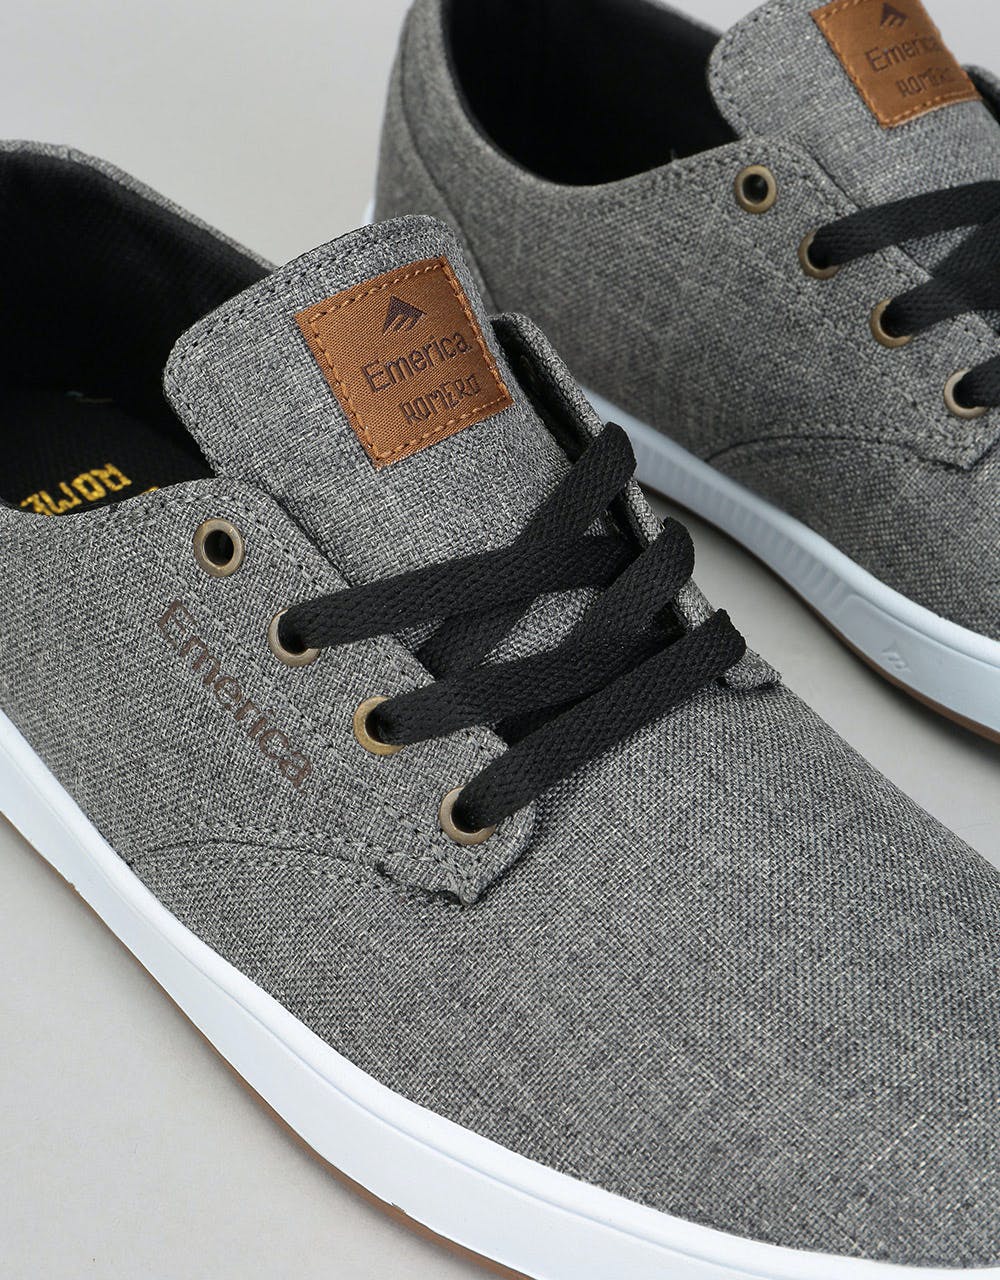 Emerica The Romero Laced SMU Skate Shoes - Grey/Brown